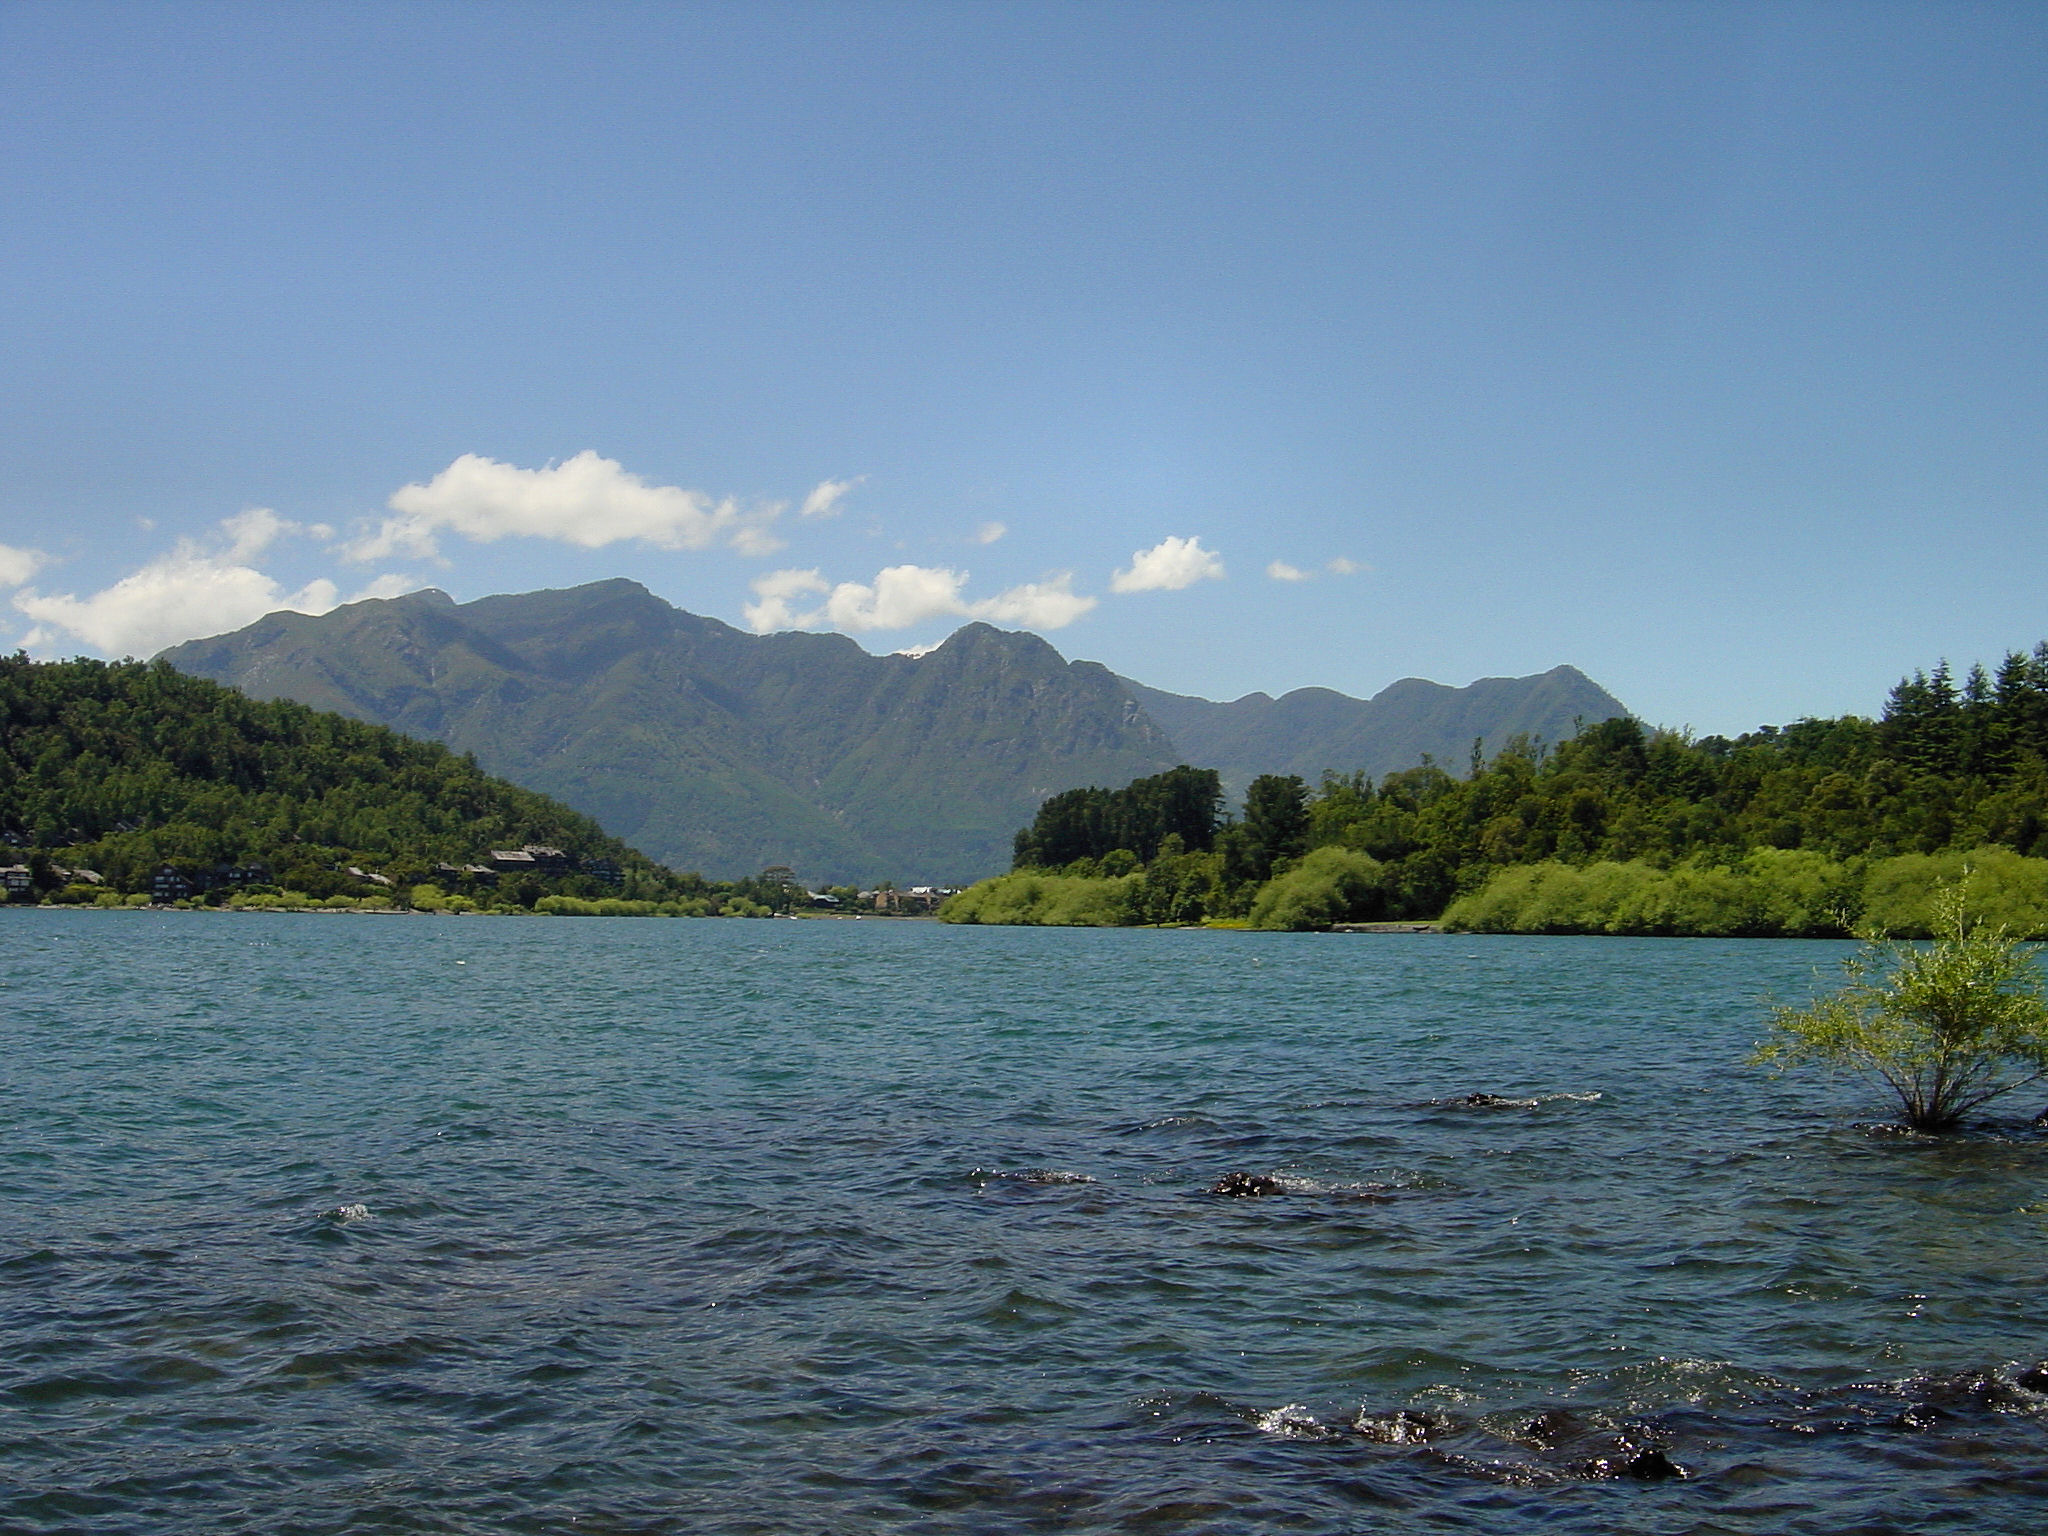 lake surrounded by mountains with trees around